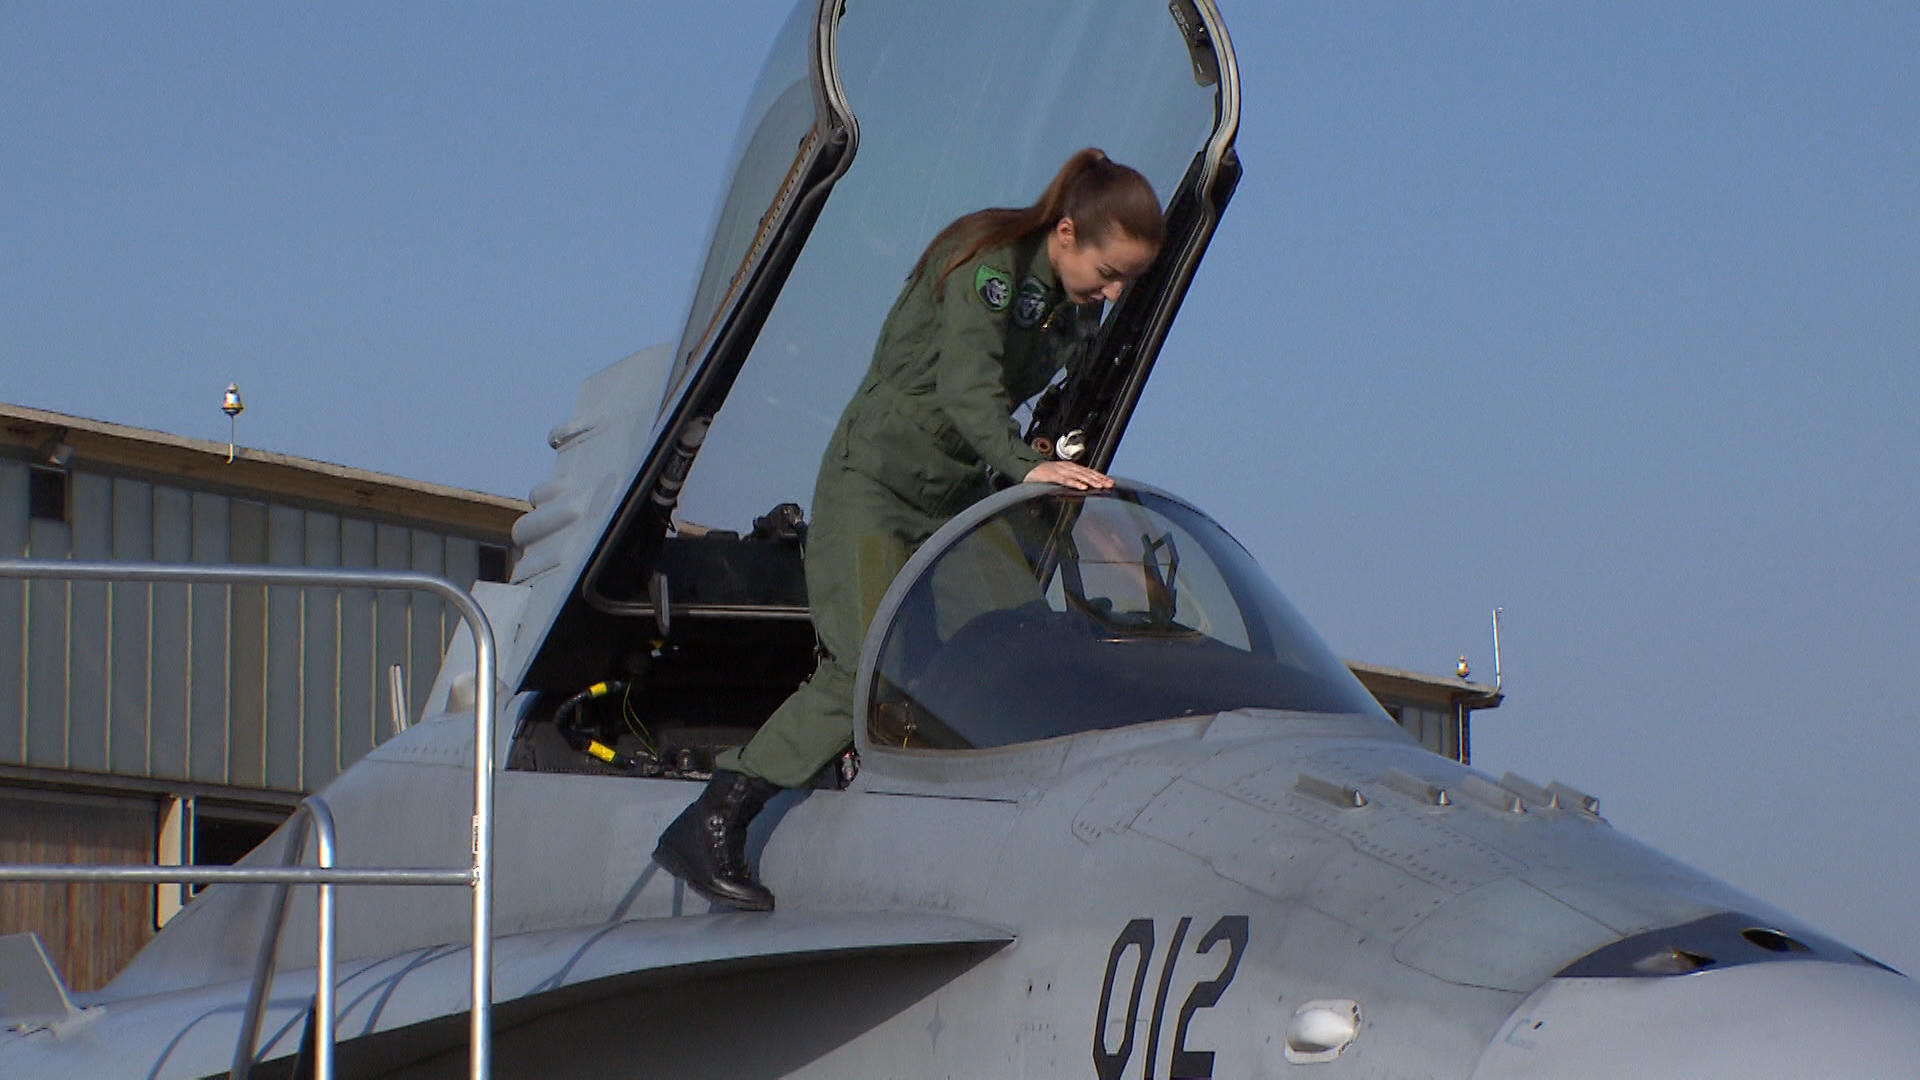 Fanny Chollet climbs into FA18 jet fighter